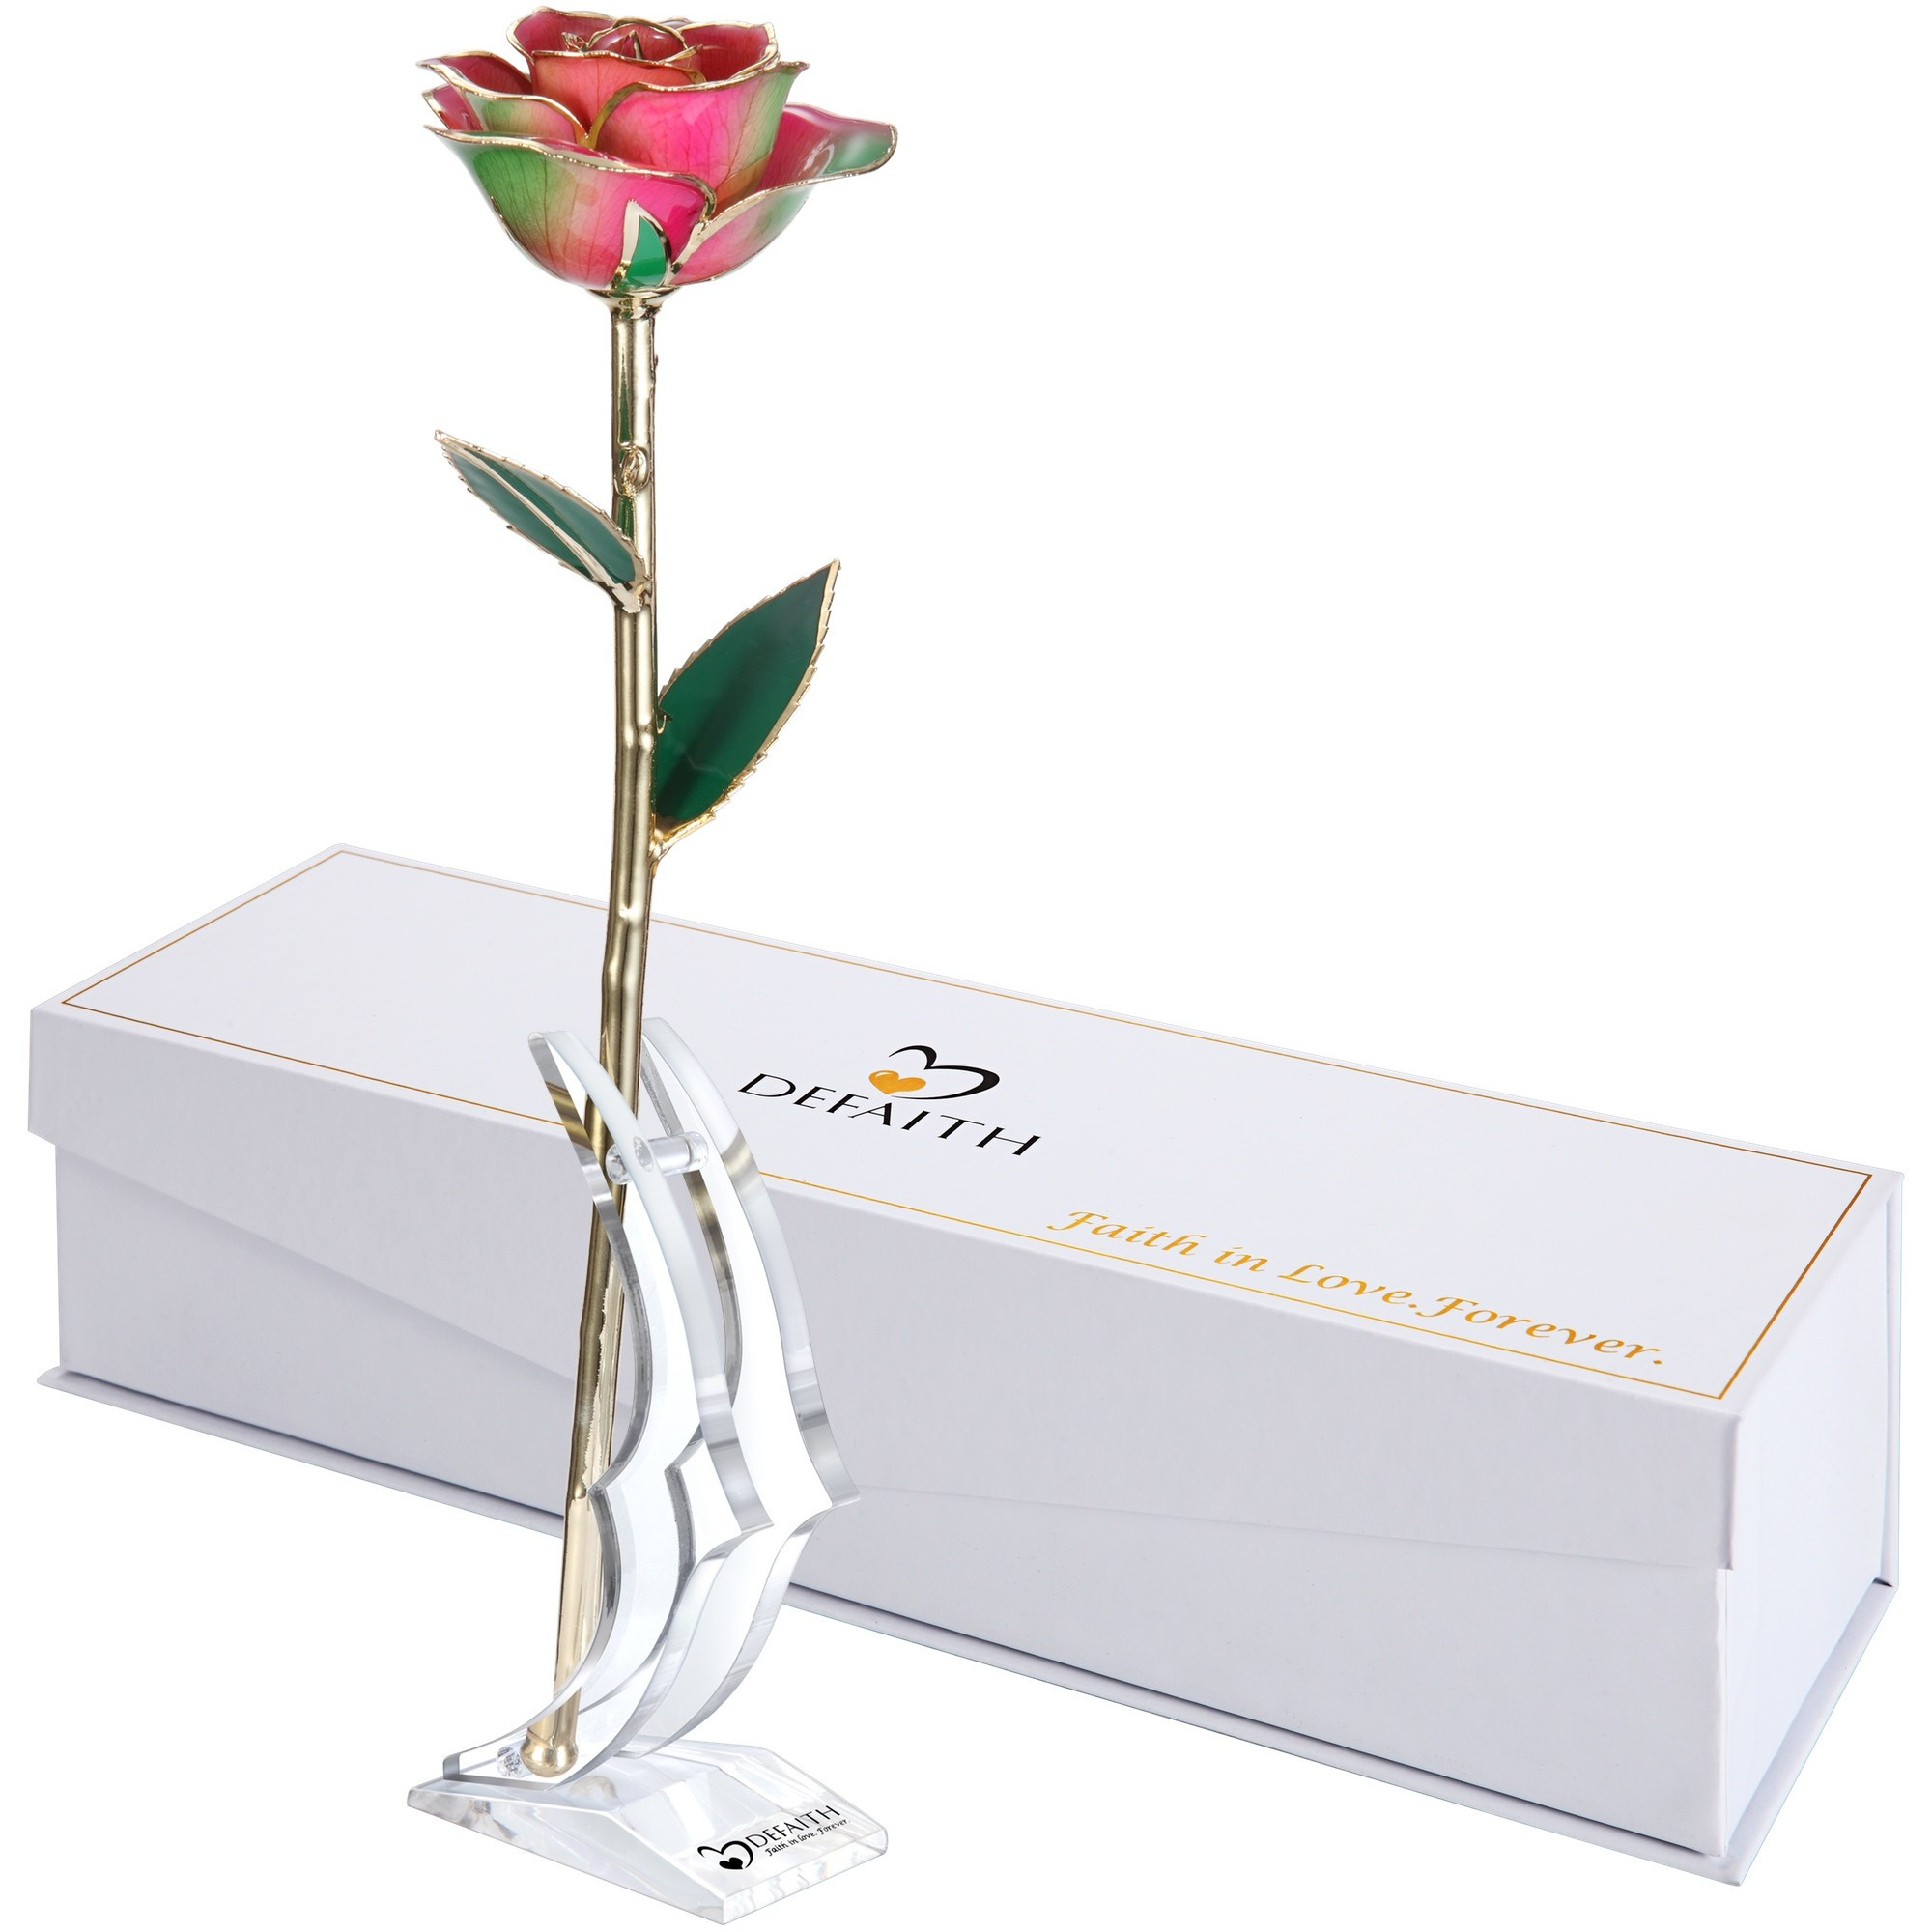 13 Fantastic 24k forever Rose and Engraved Vase 2024 free download 24k forever rose and engraved vase of gold rose defaith real rose dipped in 24k gold special keepsake with regard to defaith rainbow gold rose made from real rose flower with stand unique an